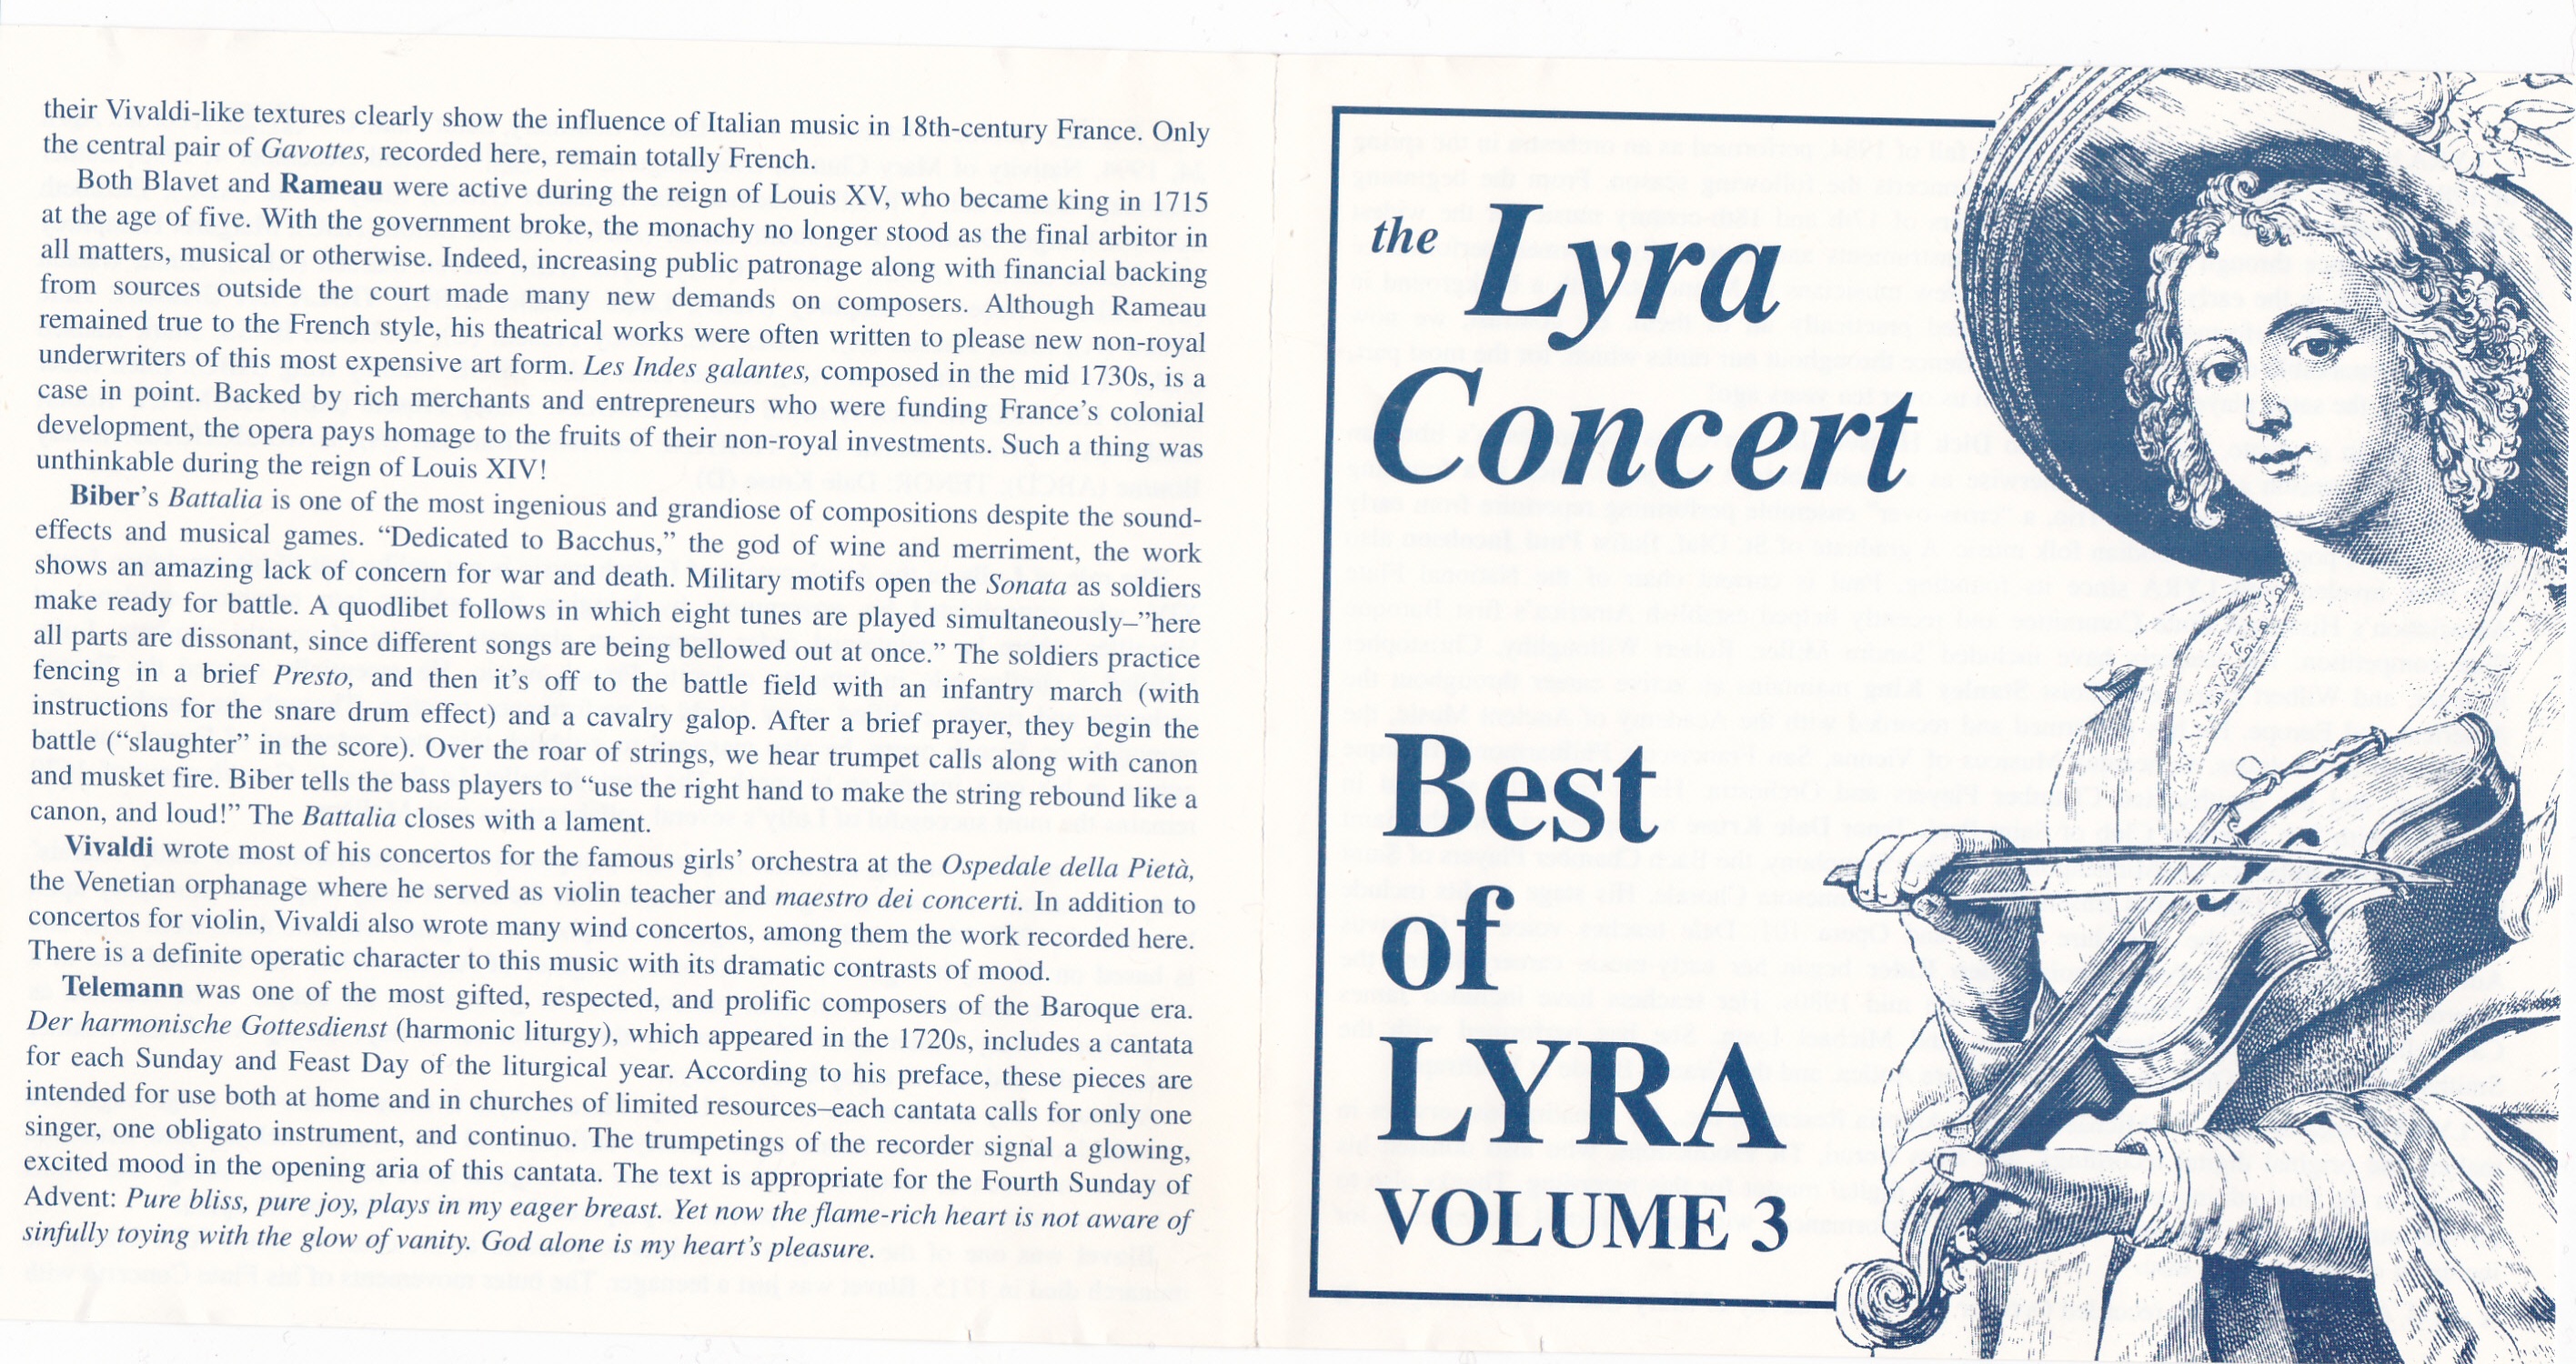 The Lyra Concert - The Best Of vol 3